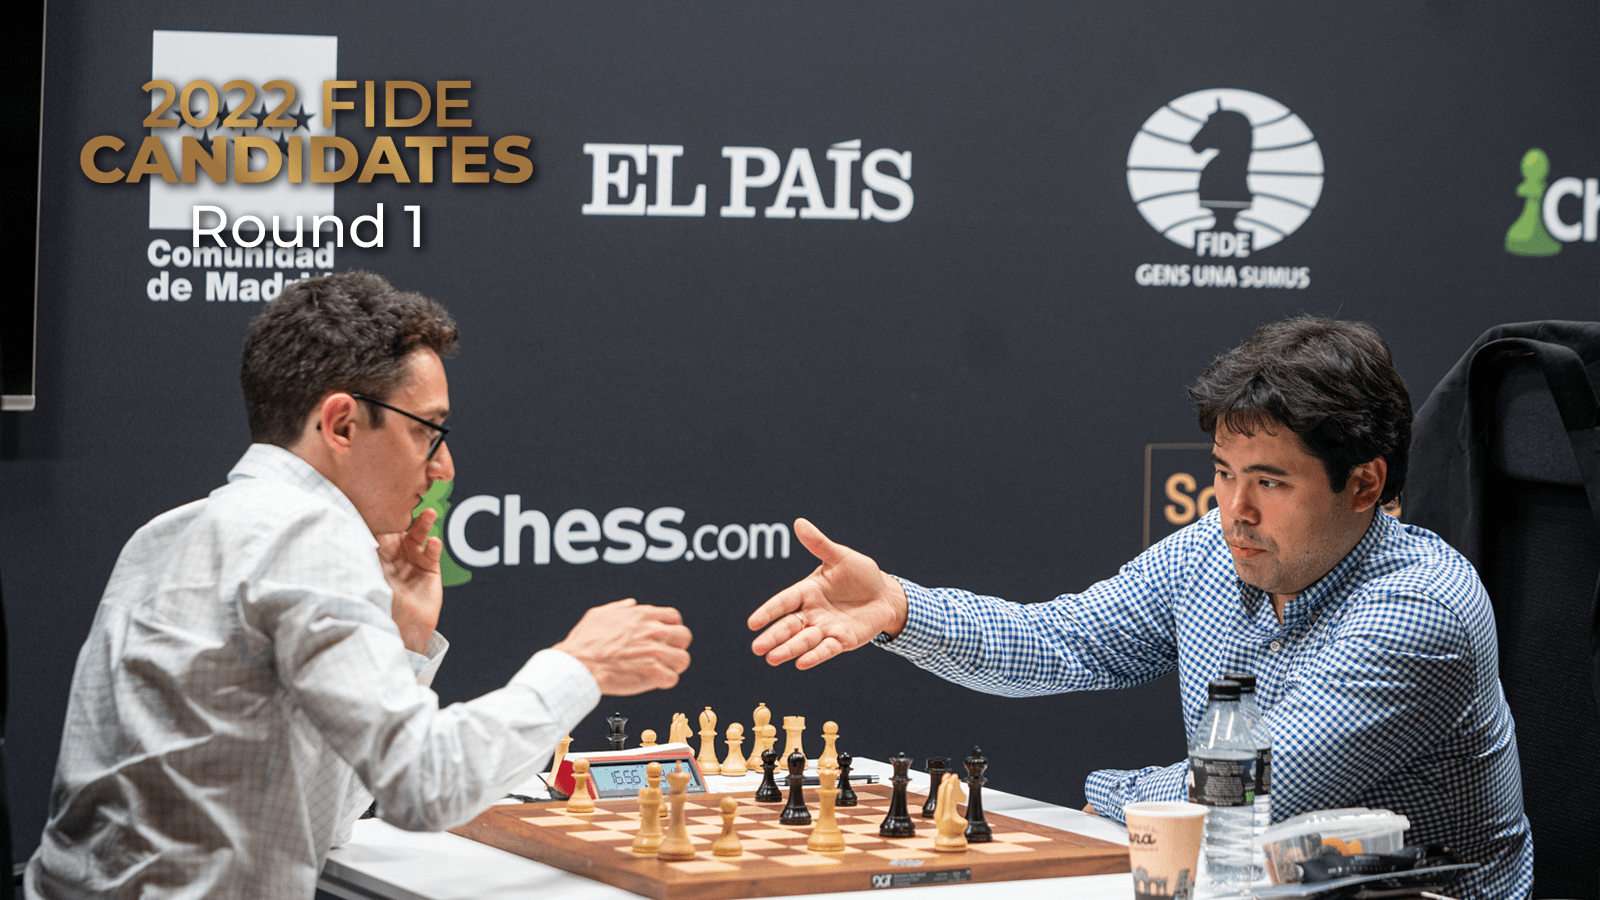 Big Wins For Ian Nepomniachtchi And Fabiano Caruana In The Round 1 of The FIDE Candidates Tournament 2022